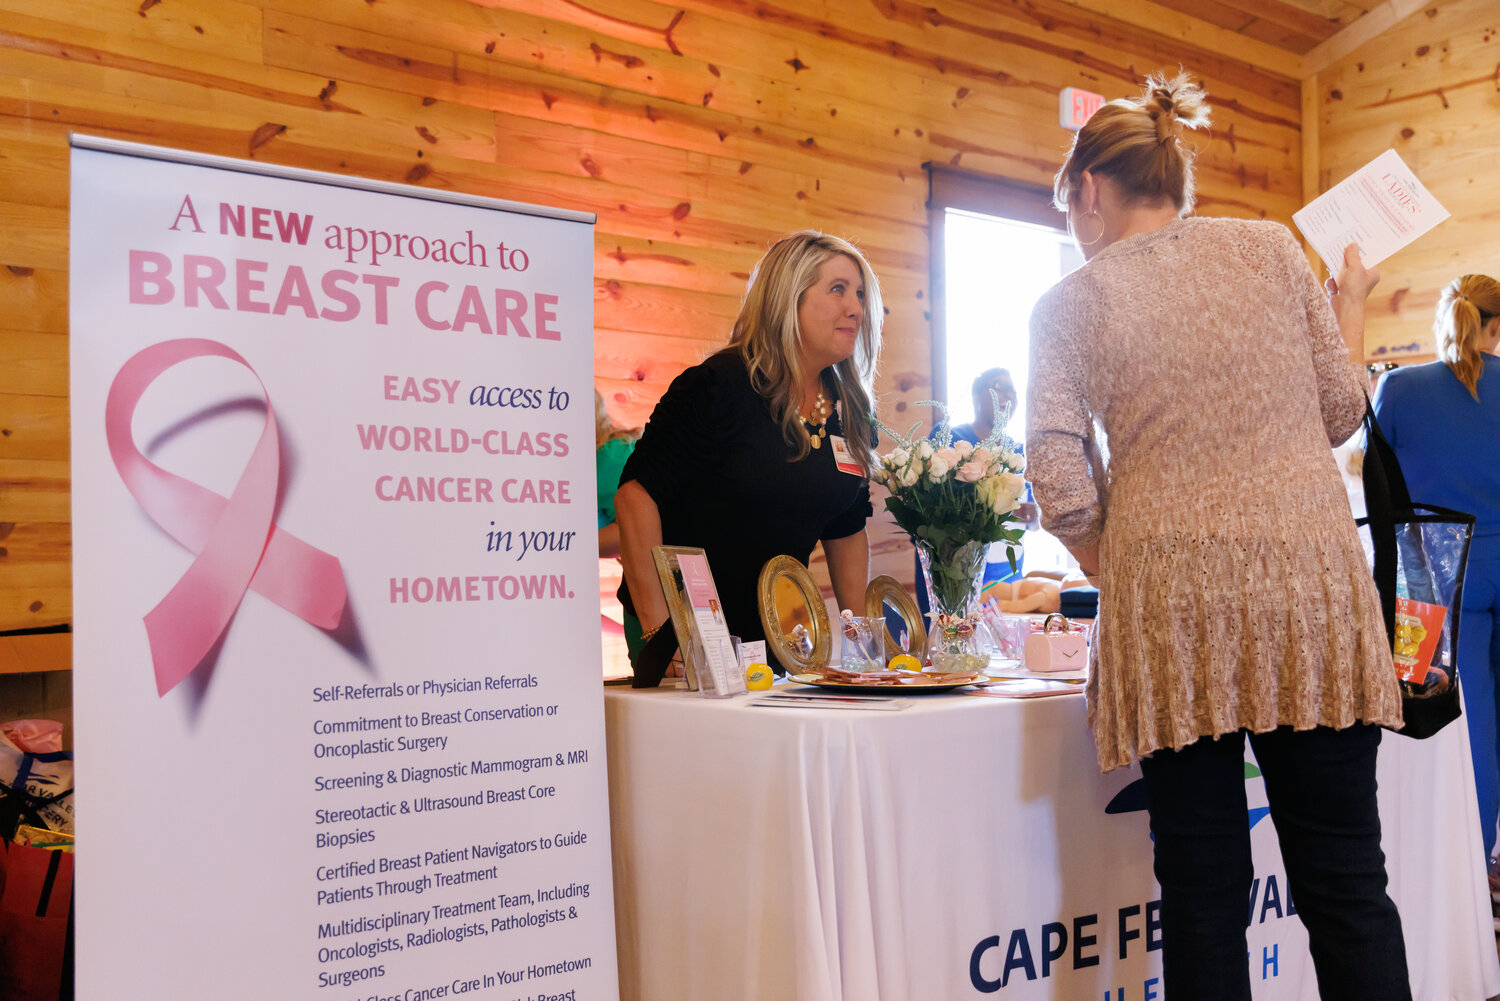 CityView Media's third annual Ladies' Night Out was held at the Carolina Barn in Spring Lake.